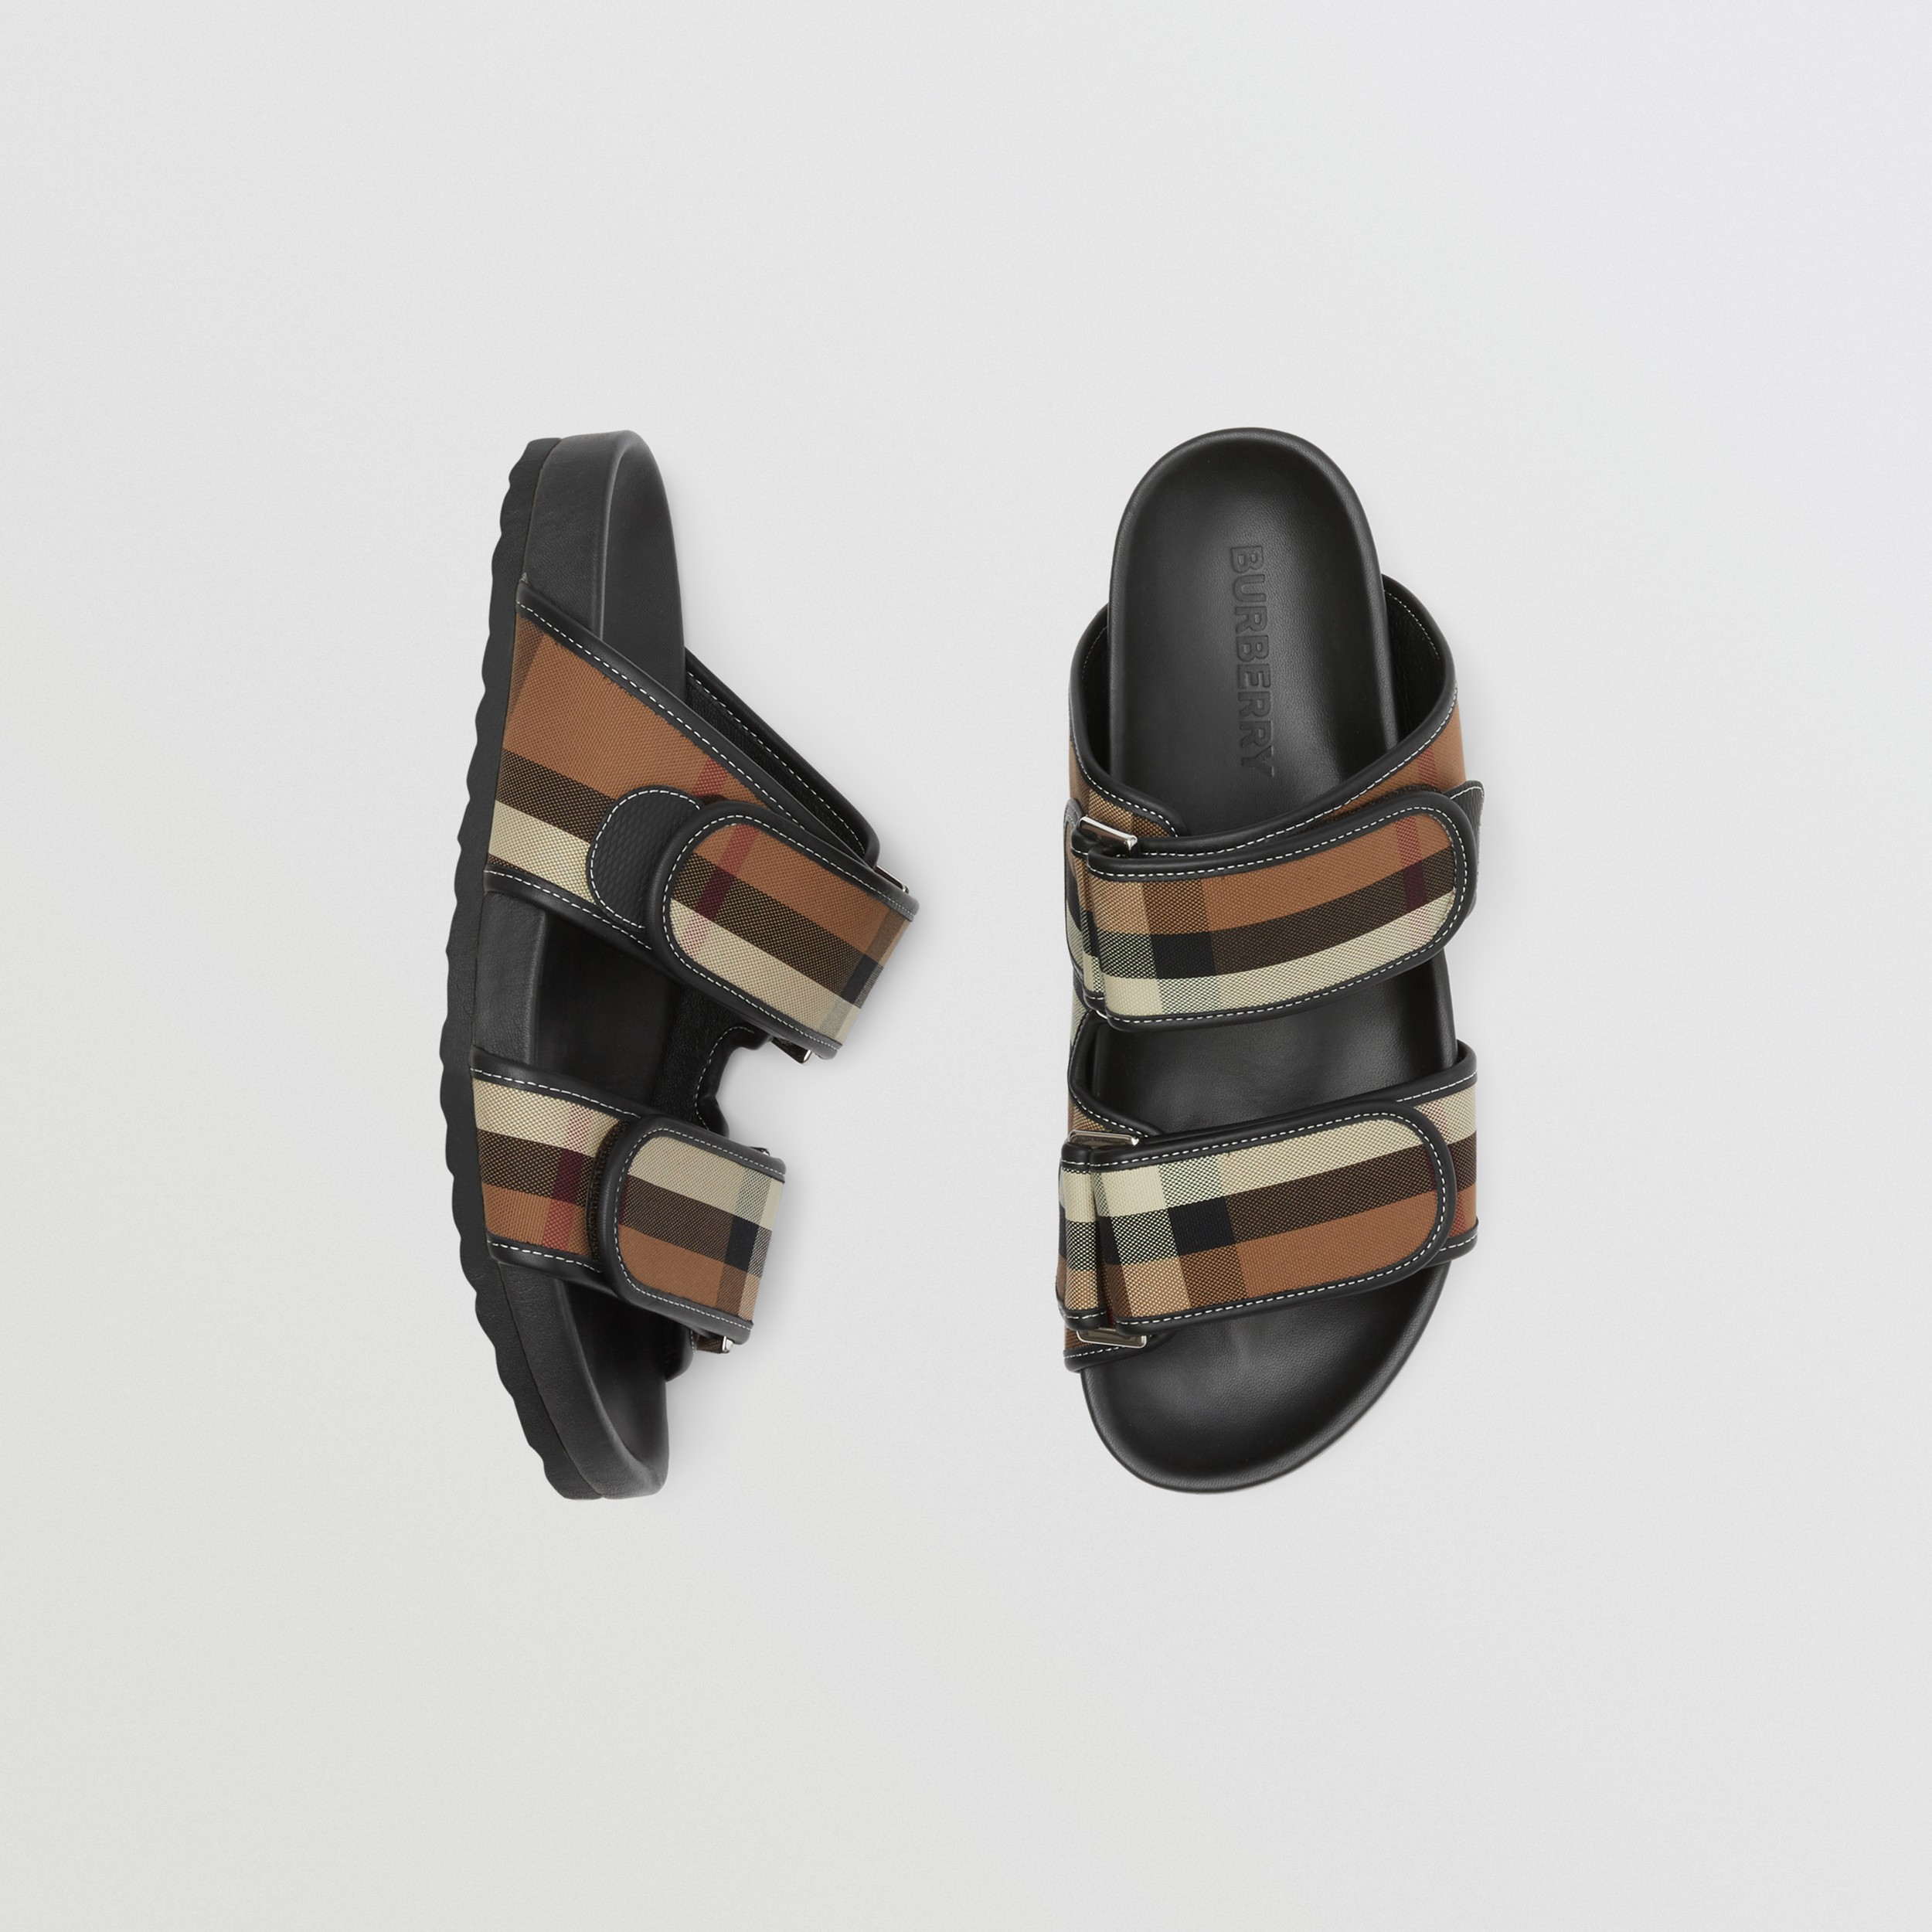 burberry.com | Check Cotton and Leather Sandals